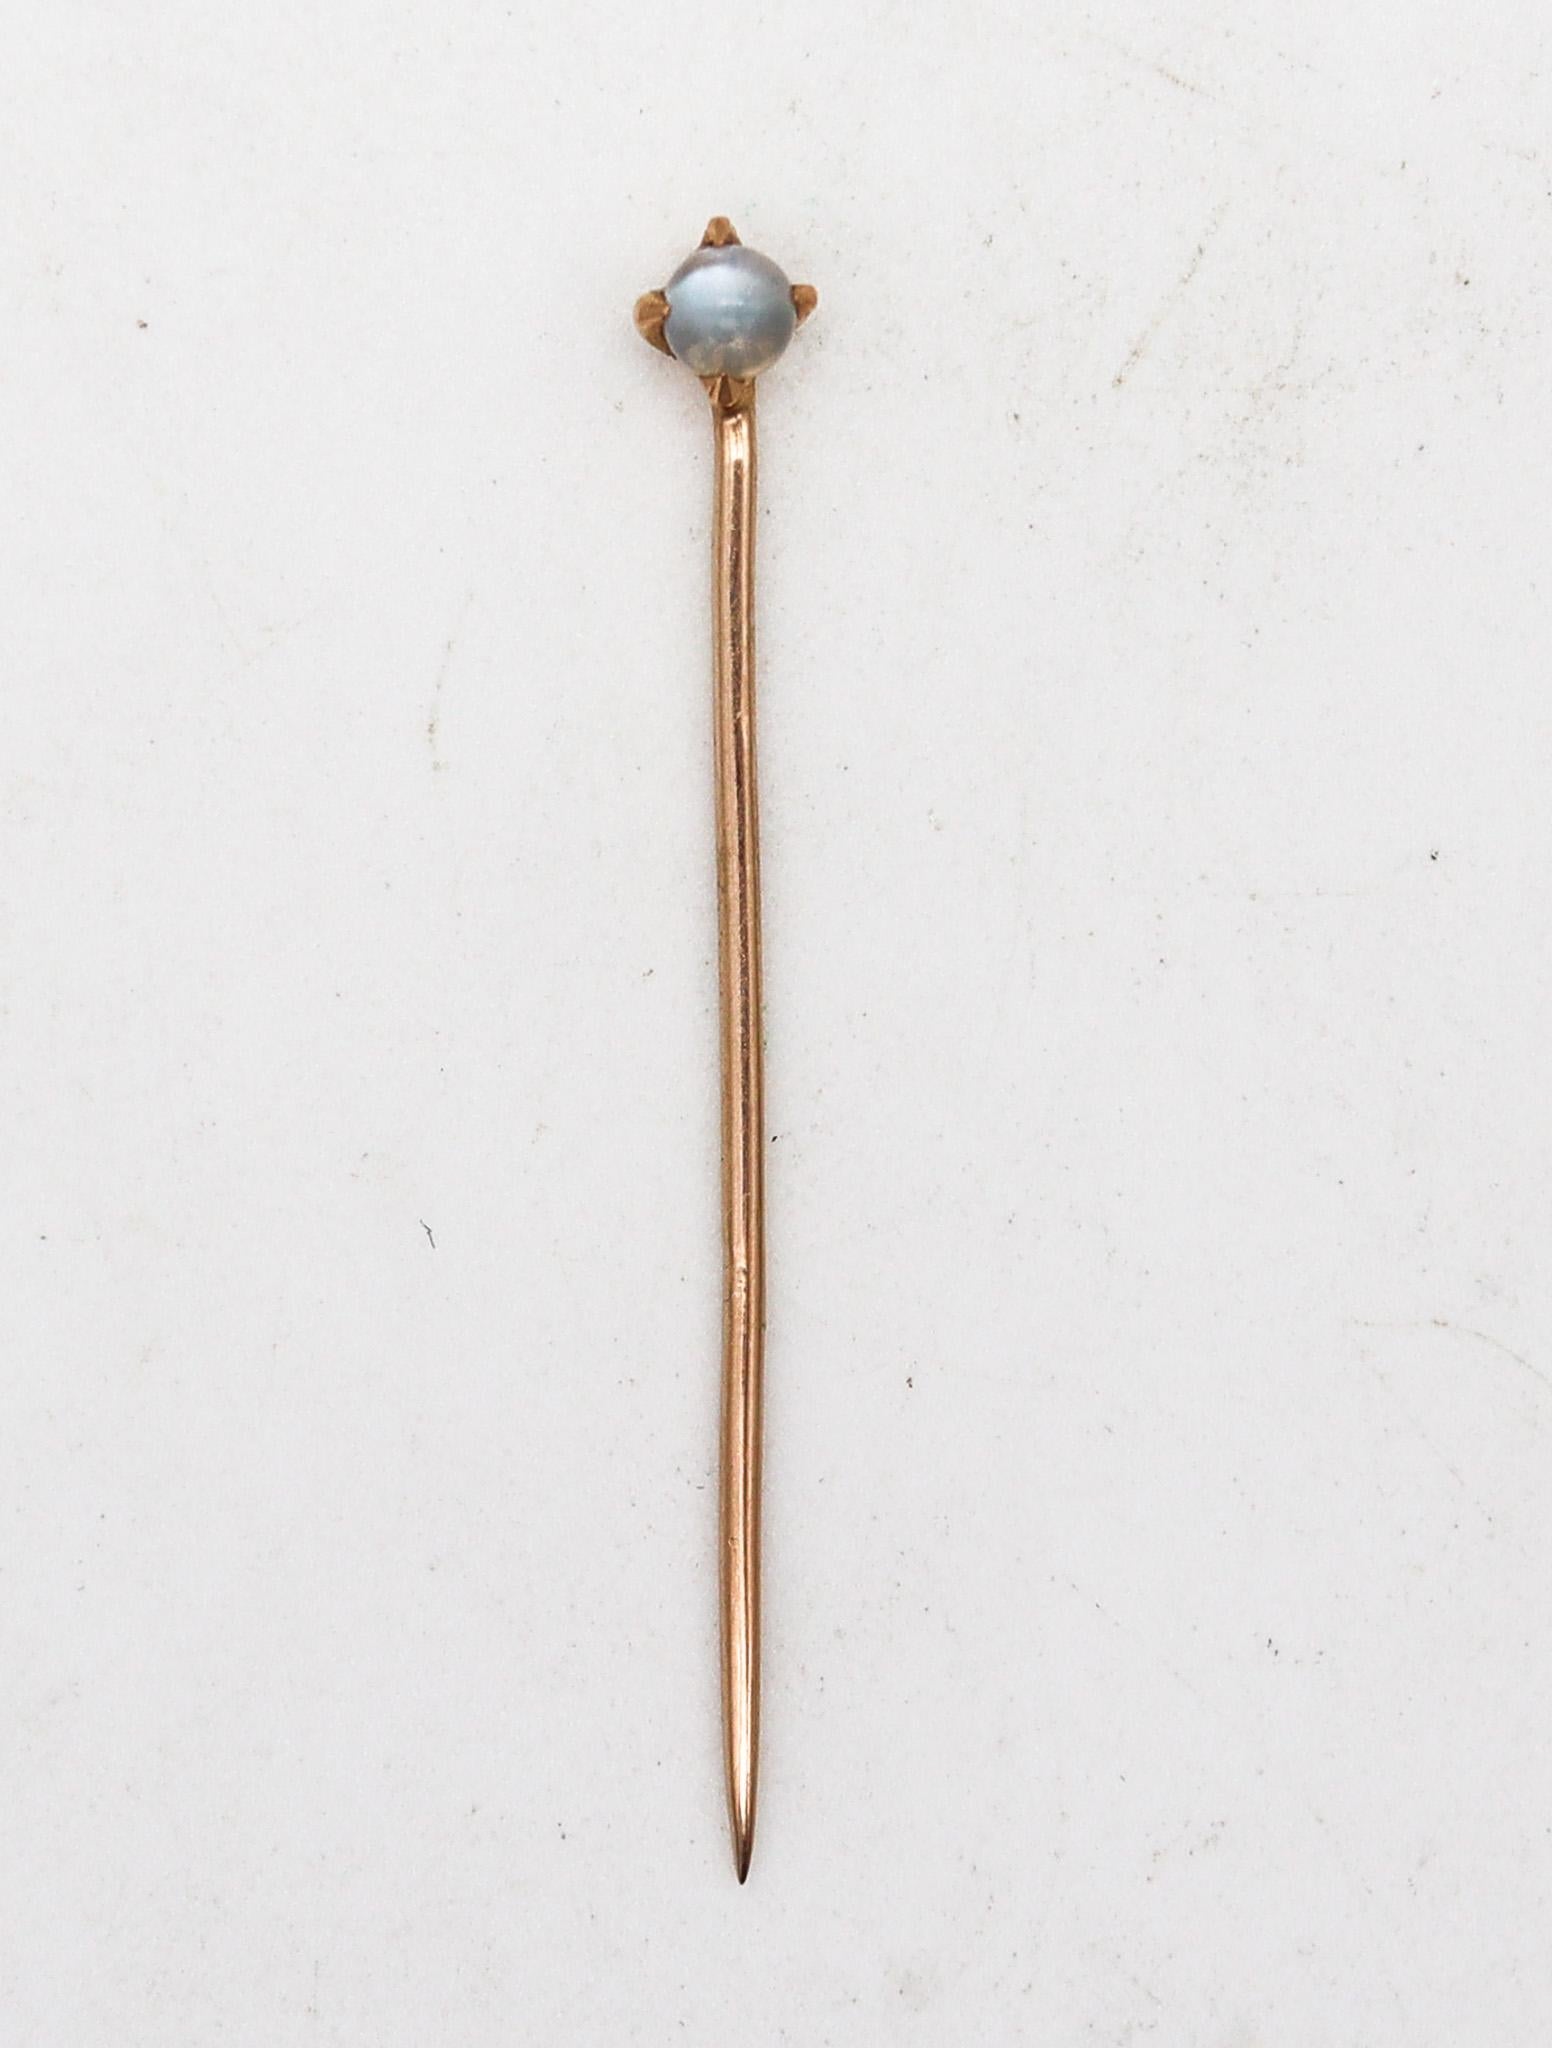 Cabochon Edwardian 1910 Pair of Stick Pins In 14Kt Yellow Gold with Cat's Eye Moonstones For Sale